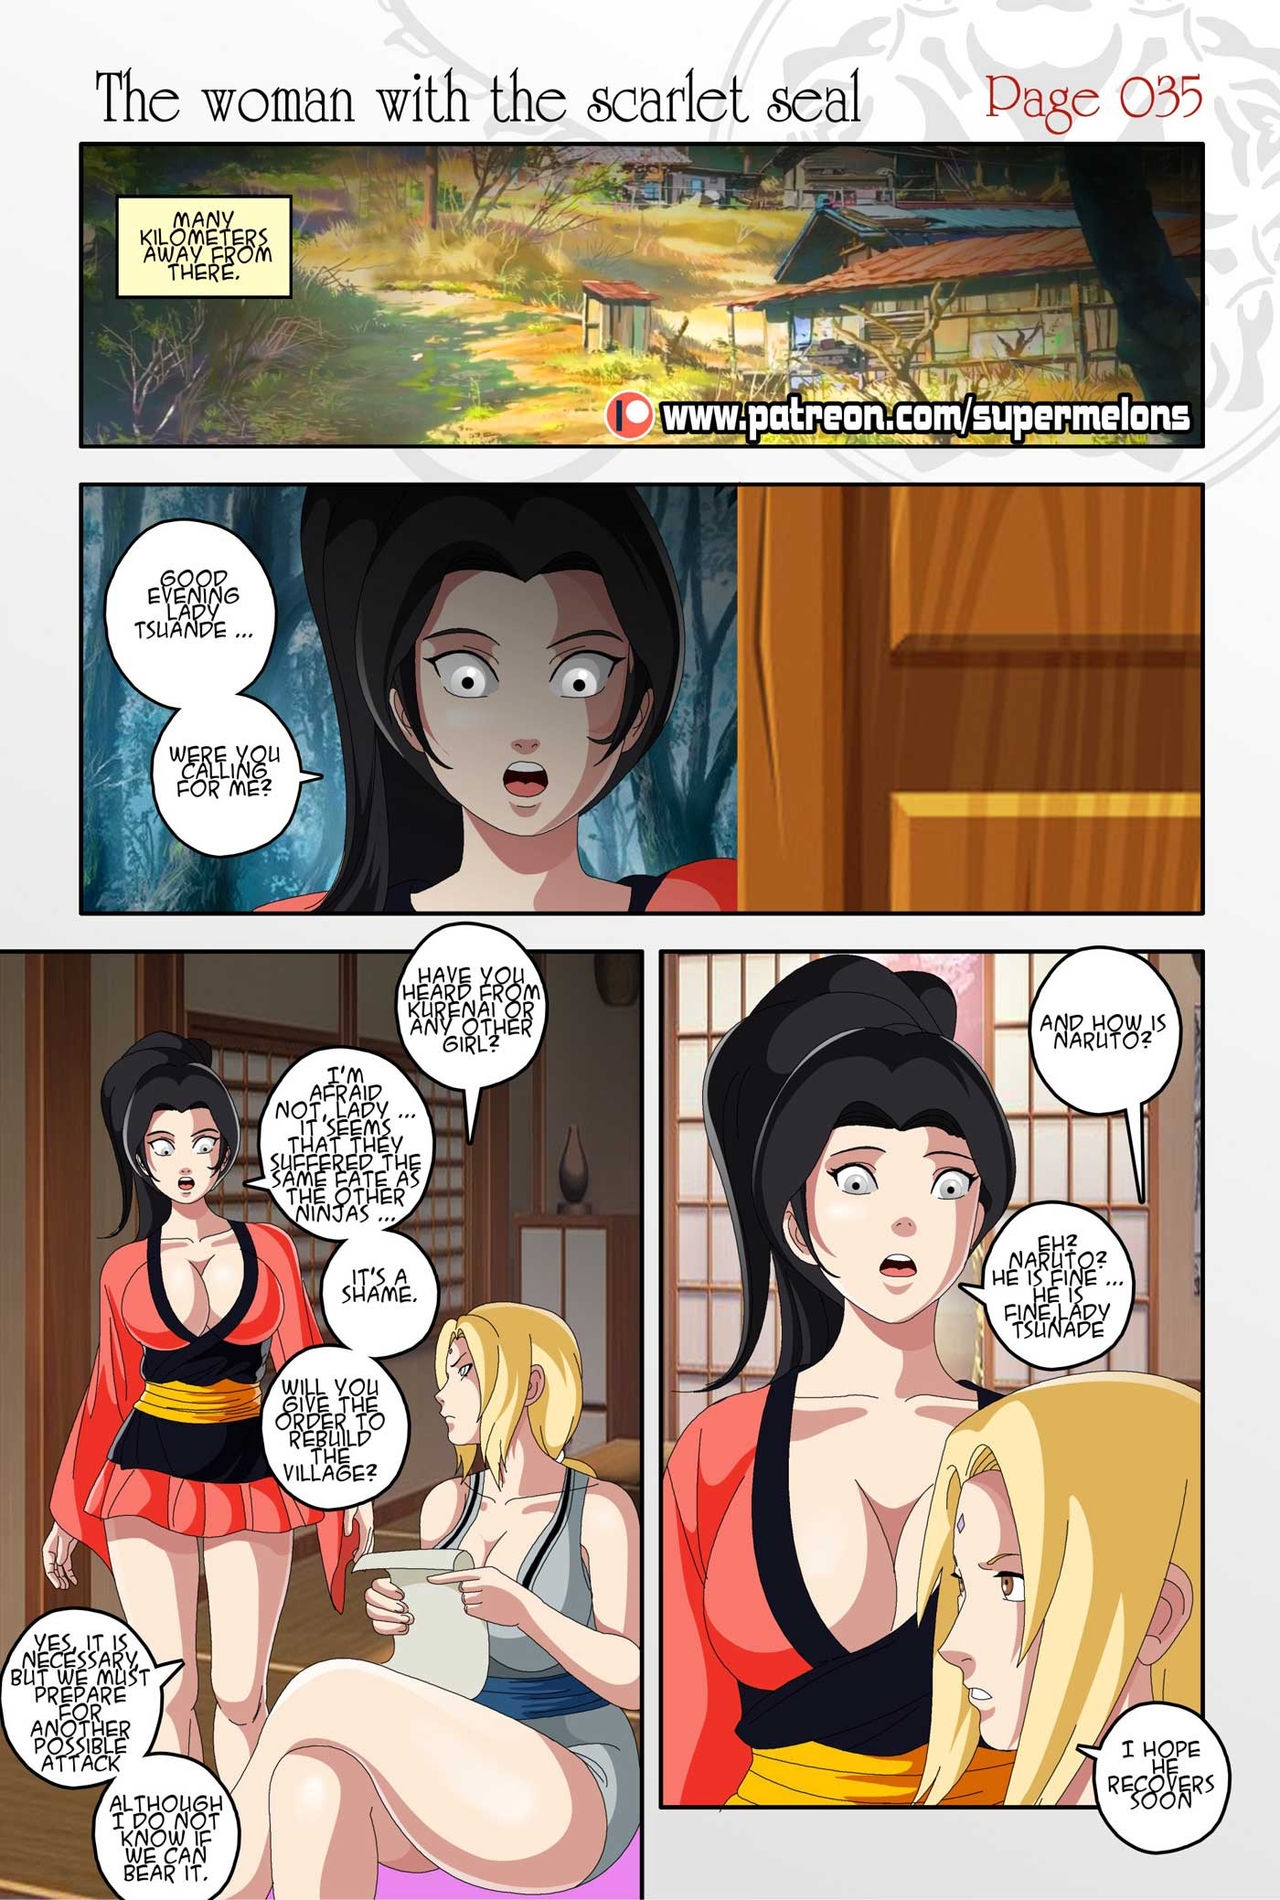 [Super Melons] The Woman with the Scarlet Seal (Naruto) 38